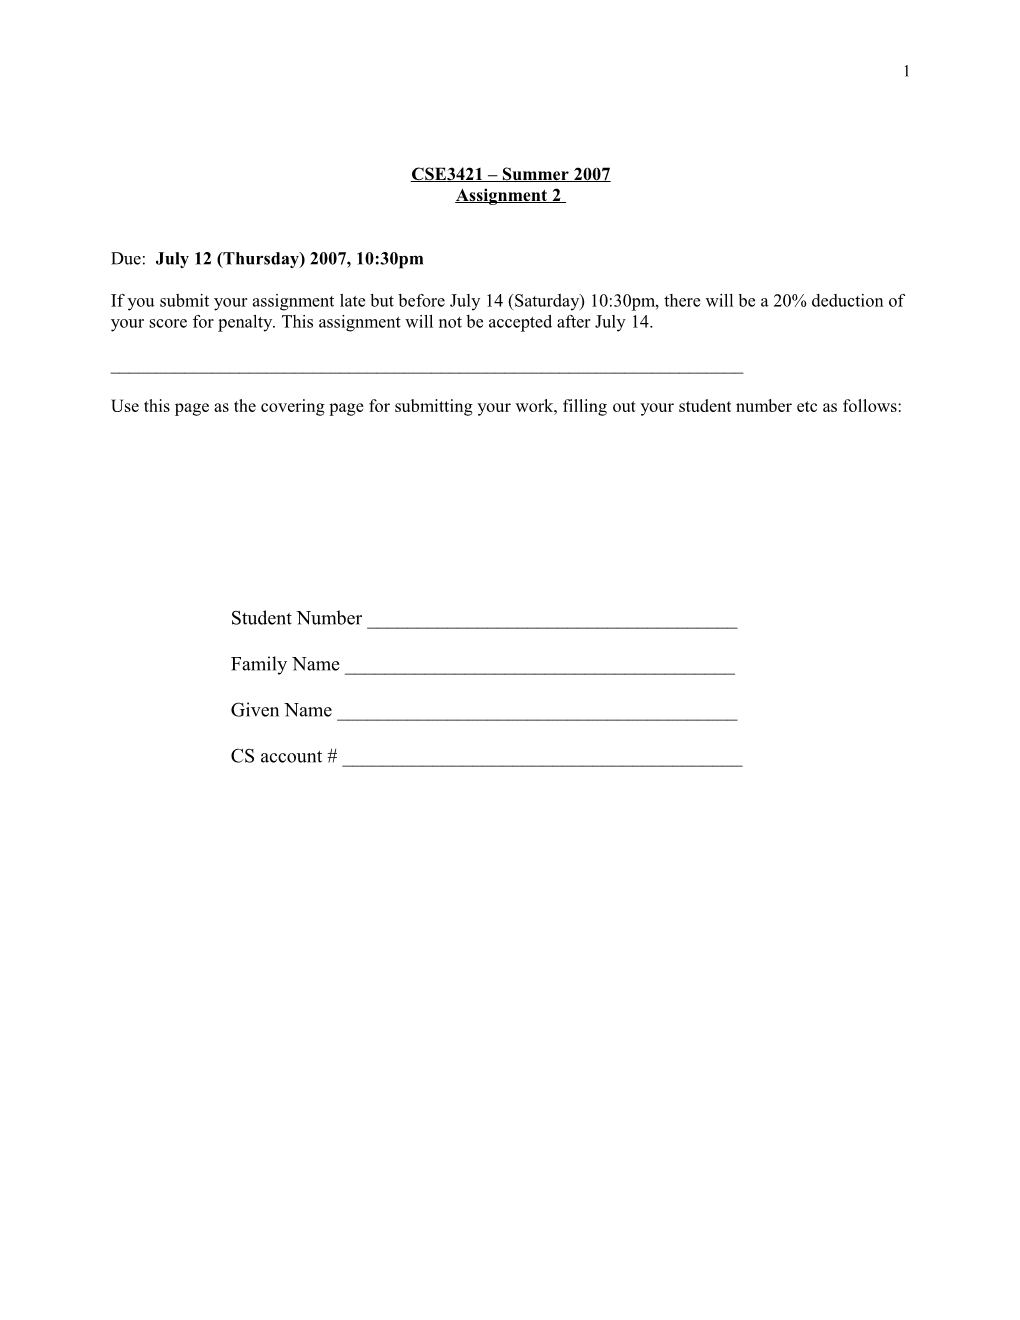 Use This Page As the Covering Page for Submitting Your Work, Filling out Your Student Number